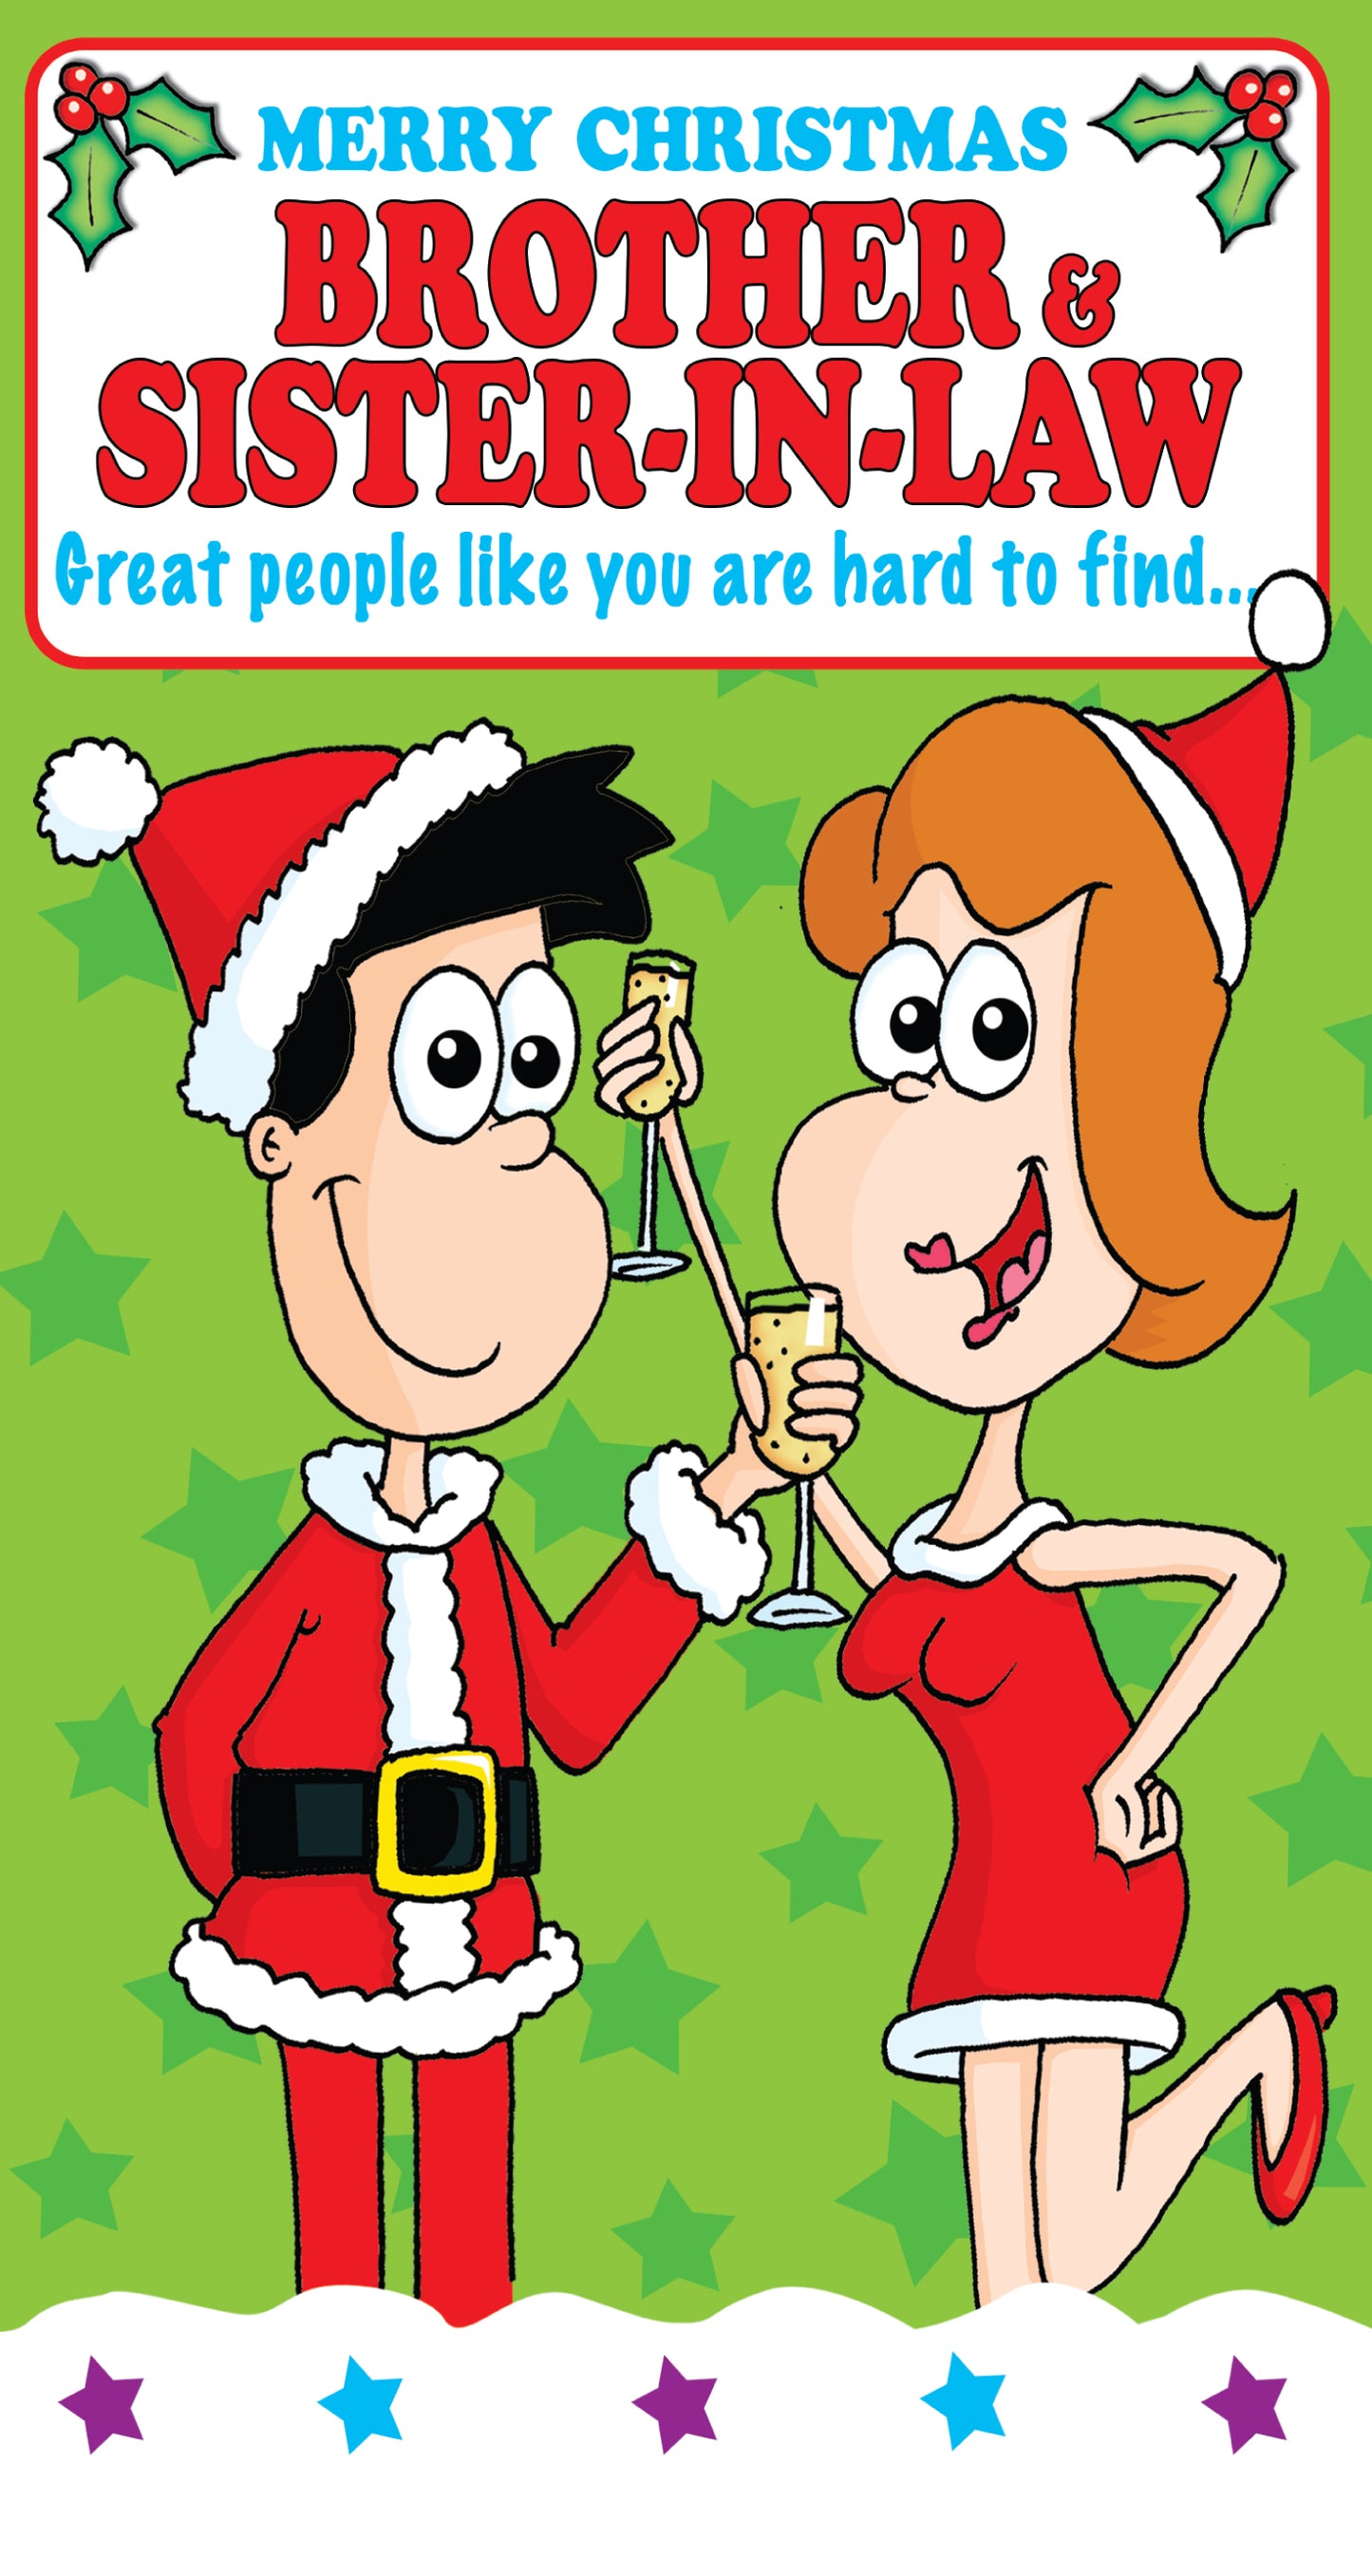 Great Brother & Sister-In-Law Funny Christmas Card